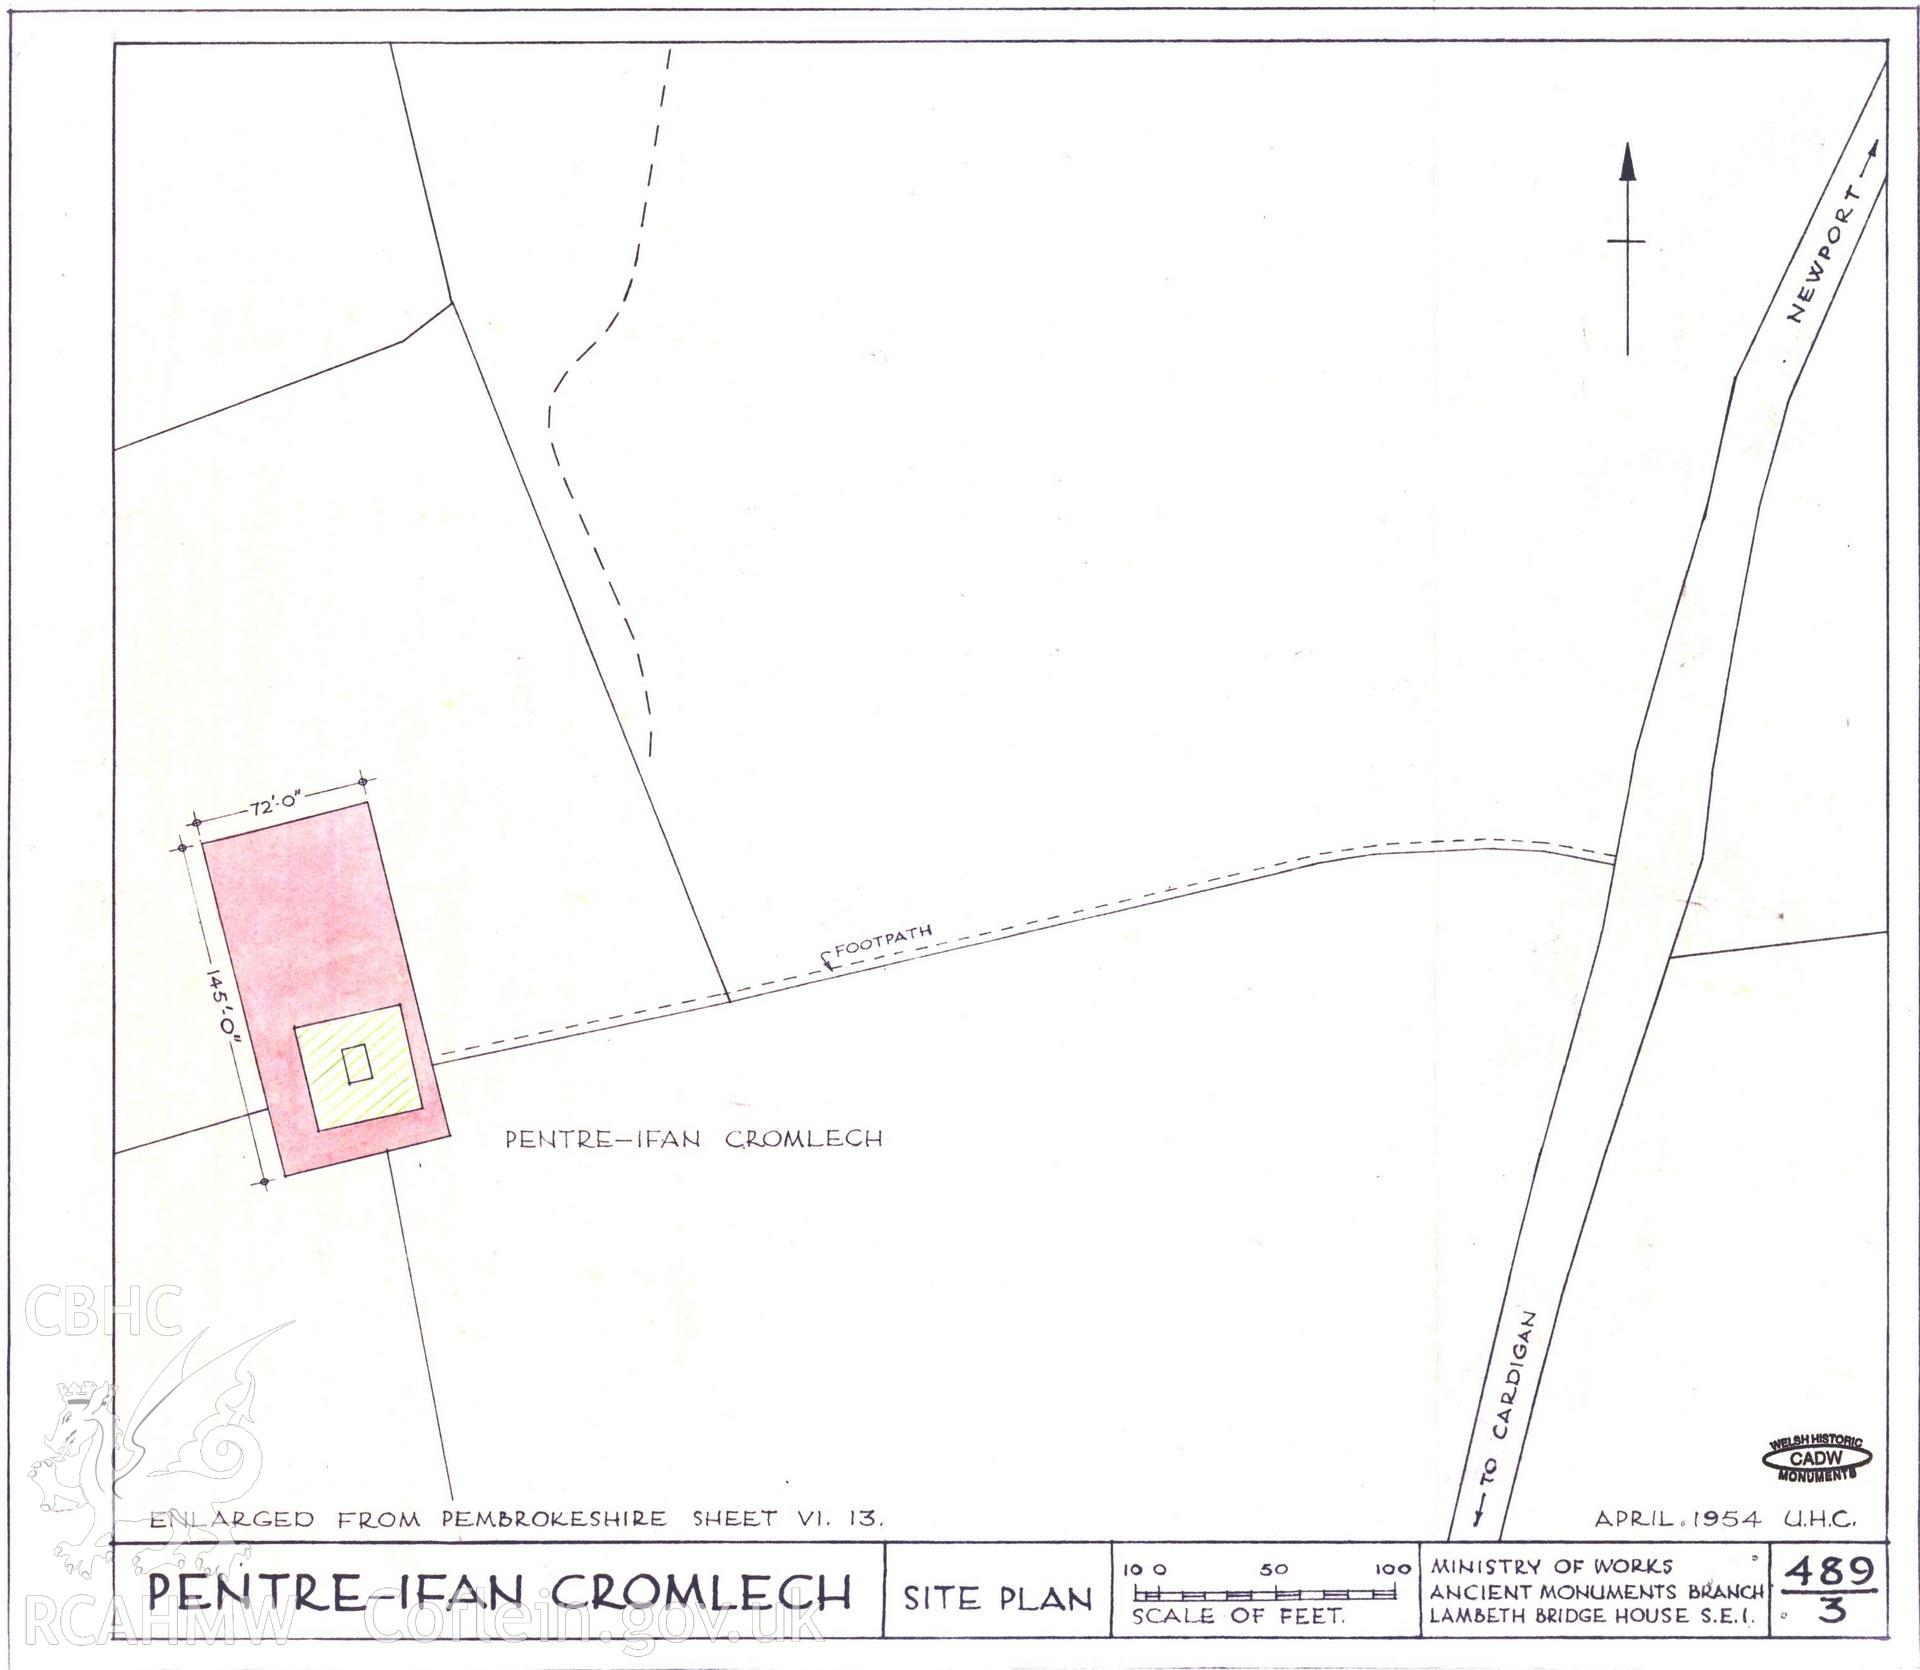 Cadw guardianship monument drawing of Pentre Ifan BC. Deed plan. Cadw Ref. No:489/3. Scale 1:625.